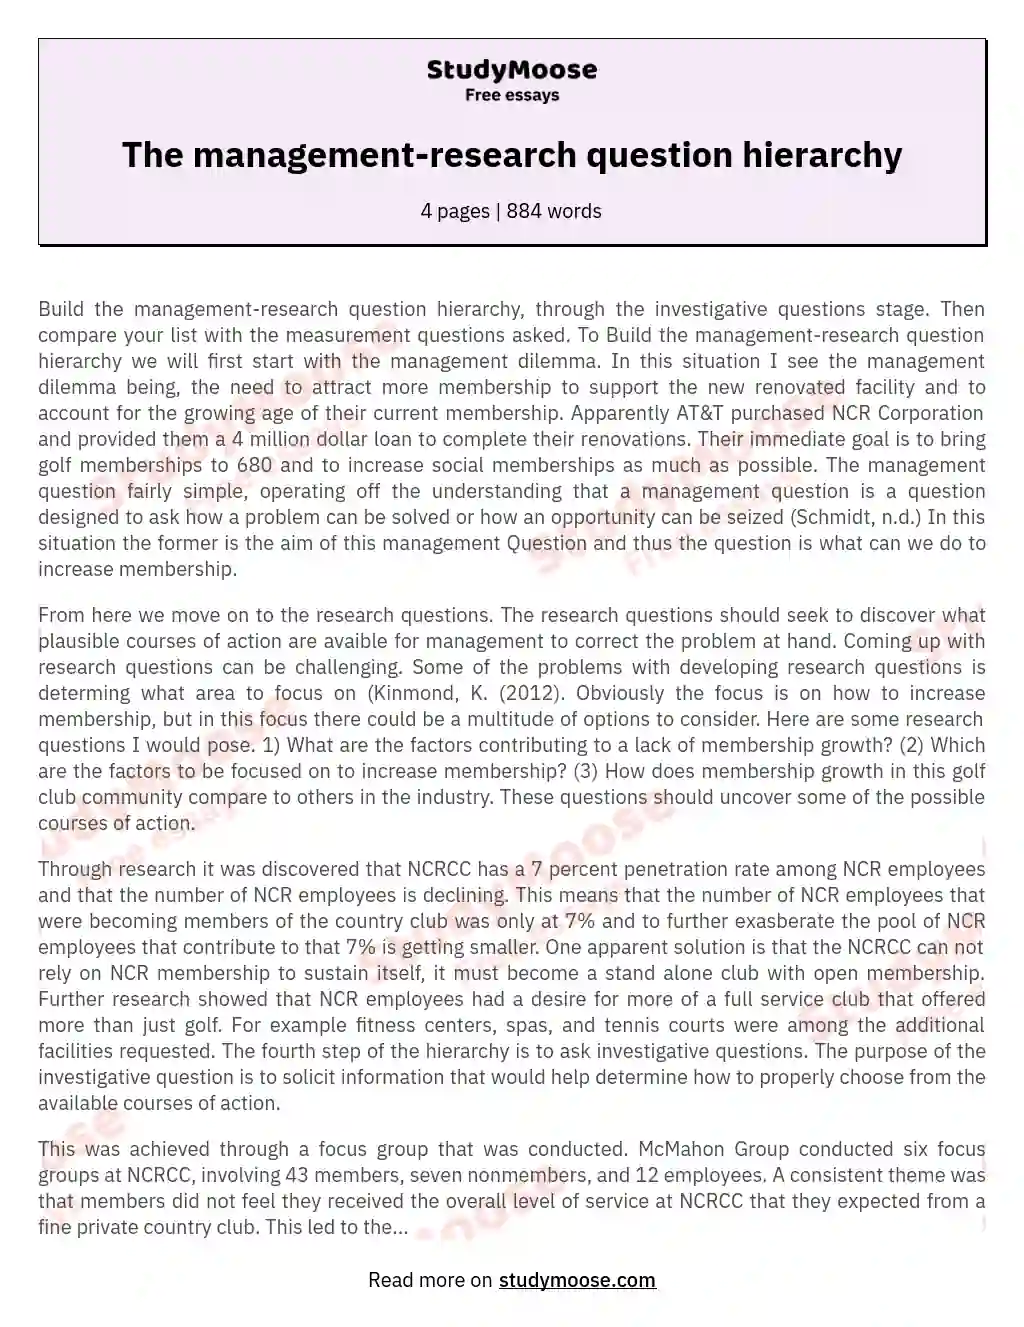 The management-research question hierarchy essay